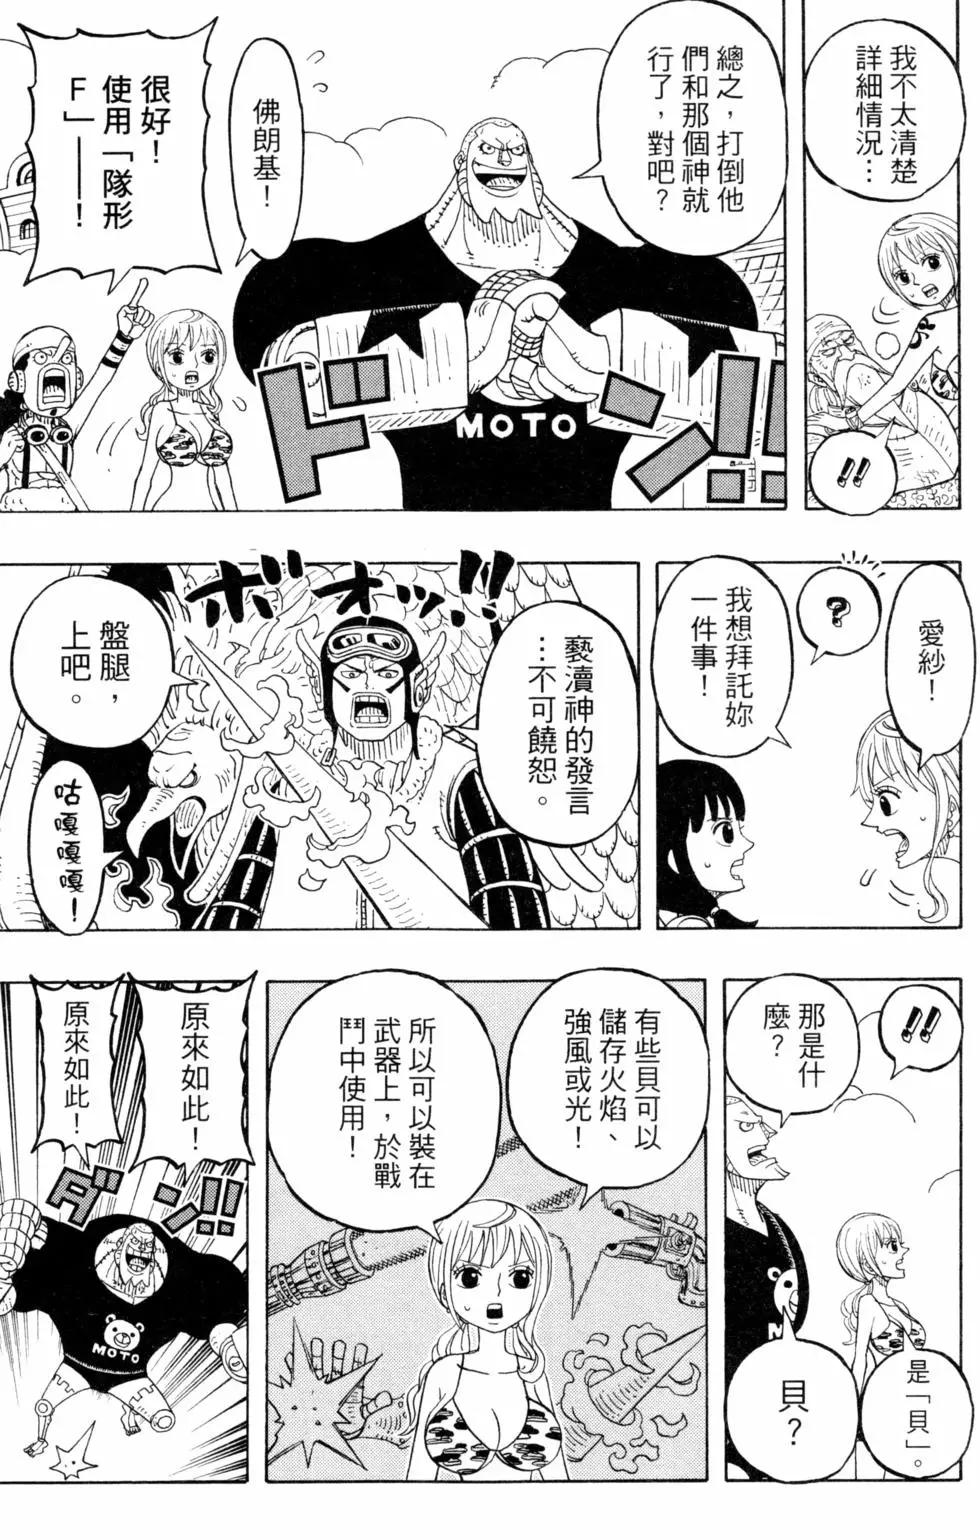 One piece party - 第06卷(2/4) - 2